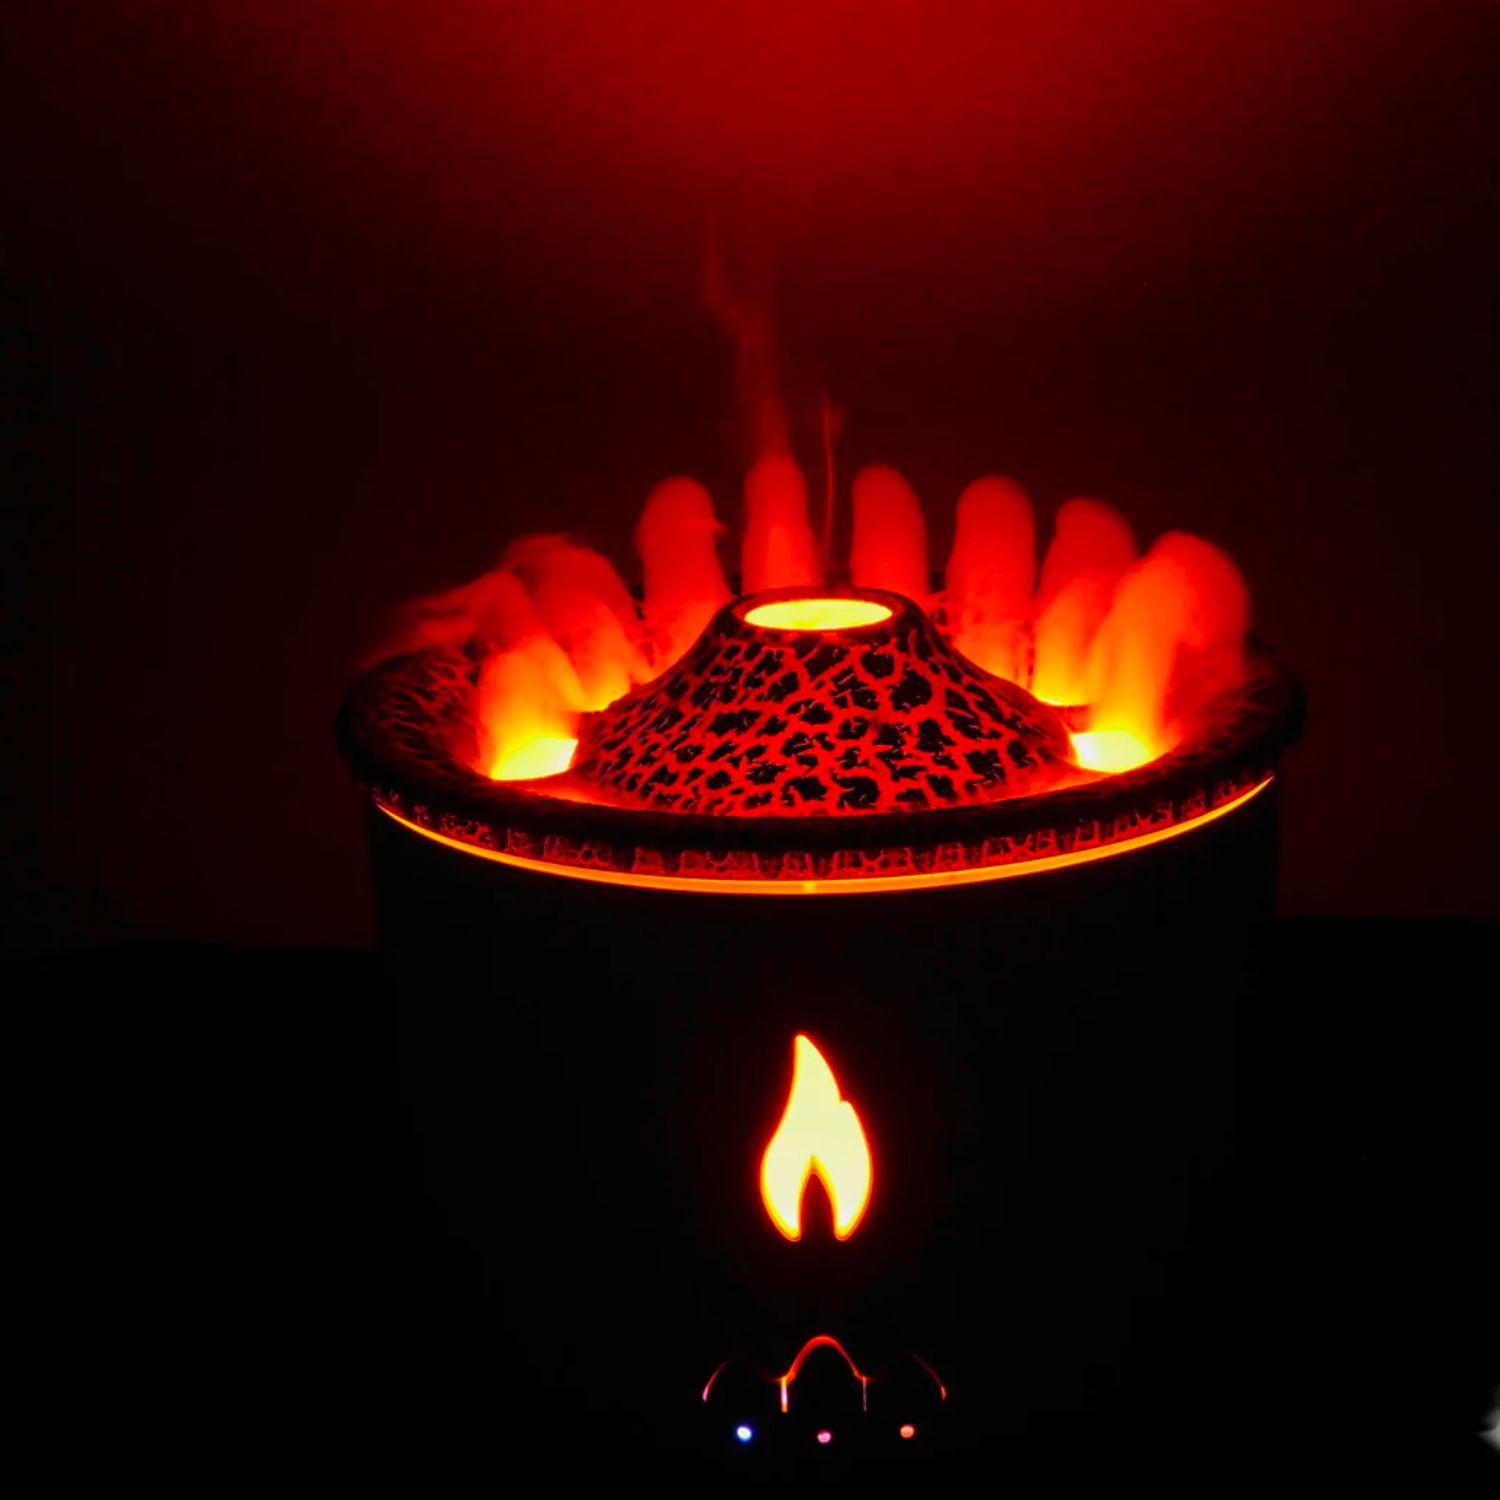 The Volcano Flame Humidifier